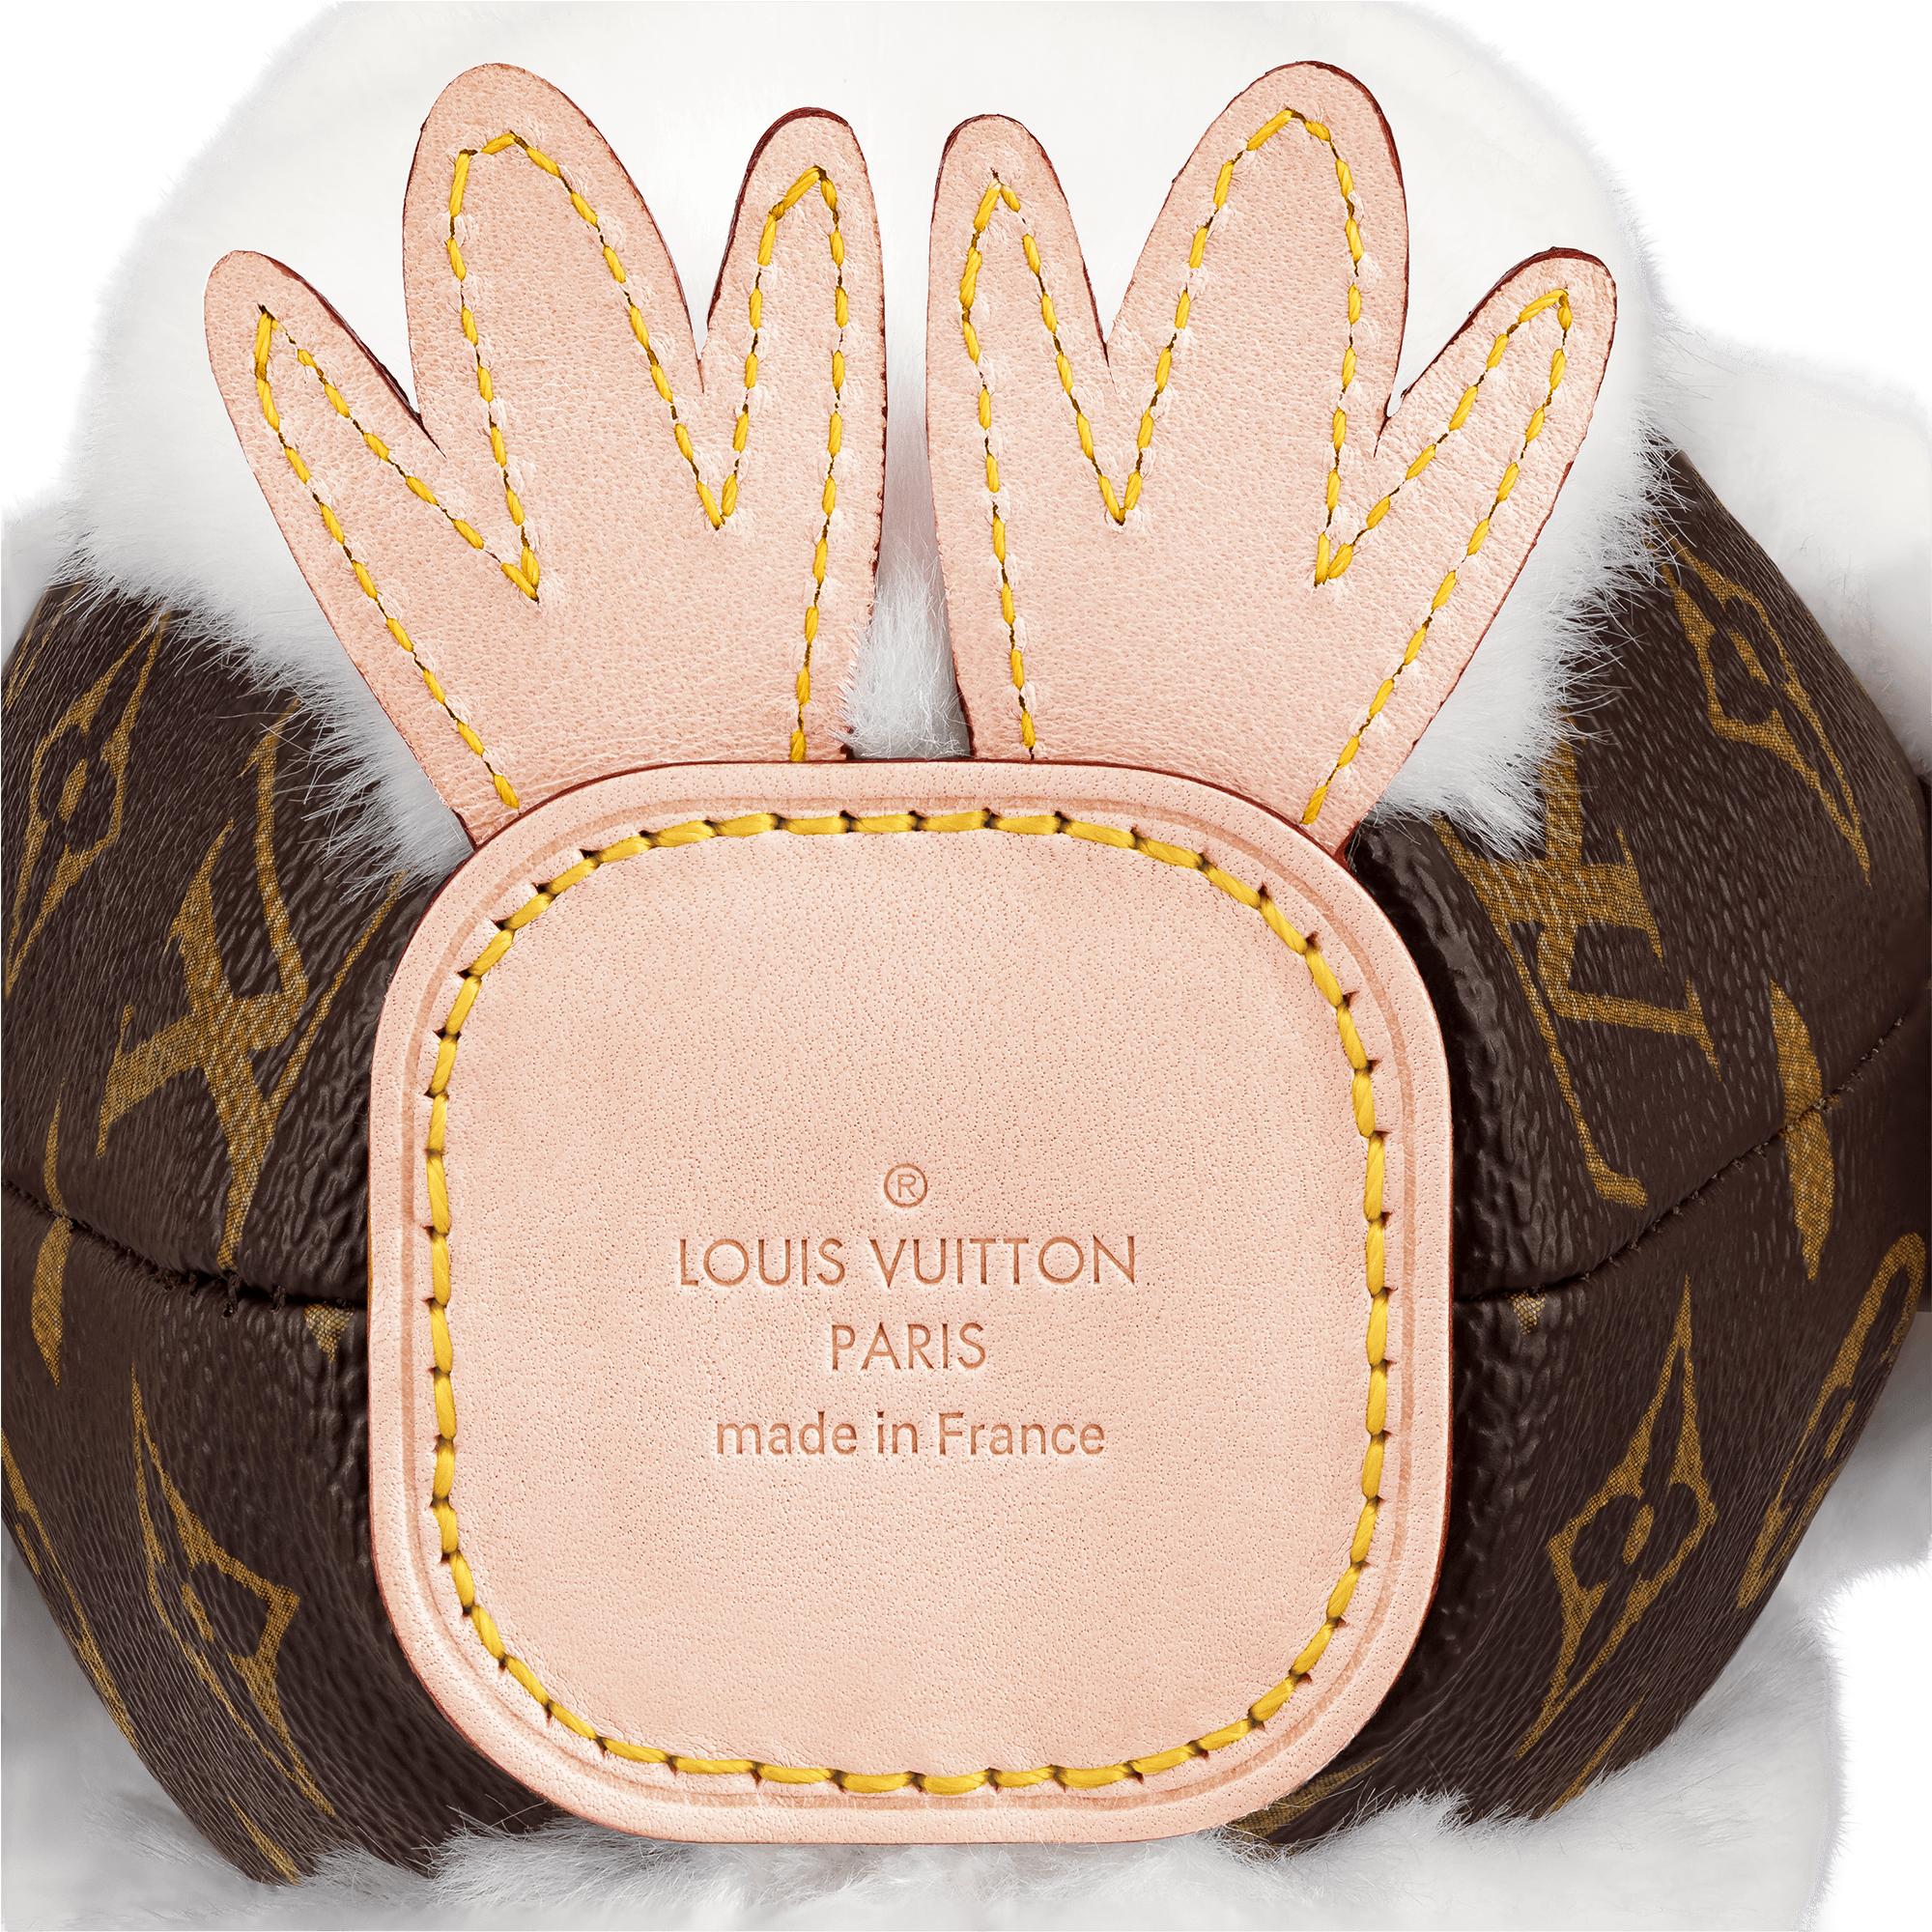 RINKAN GINZA - 《SUPREME》×LOUIS VUITTON & LOUIS VUITTON DODO doll. - we  can ship all items. please ASK for ”LINE” or ”Wechat”. Contat Us LINE  ID⇢tsubac WECHAT⇢yez283 TEL✆⇢03-5537-5227